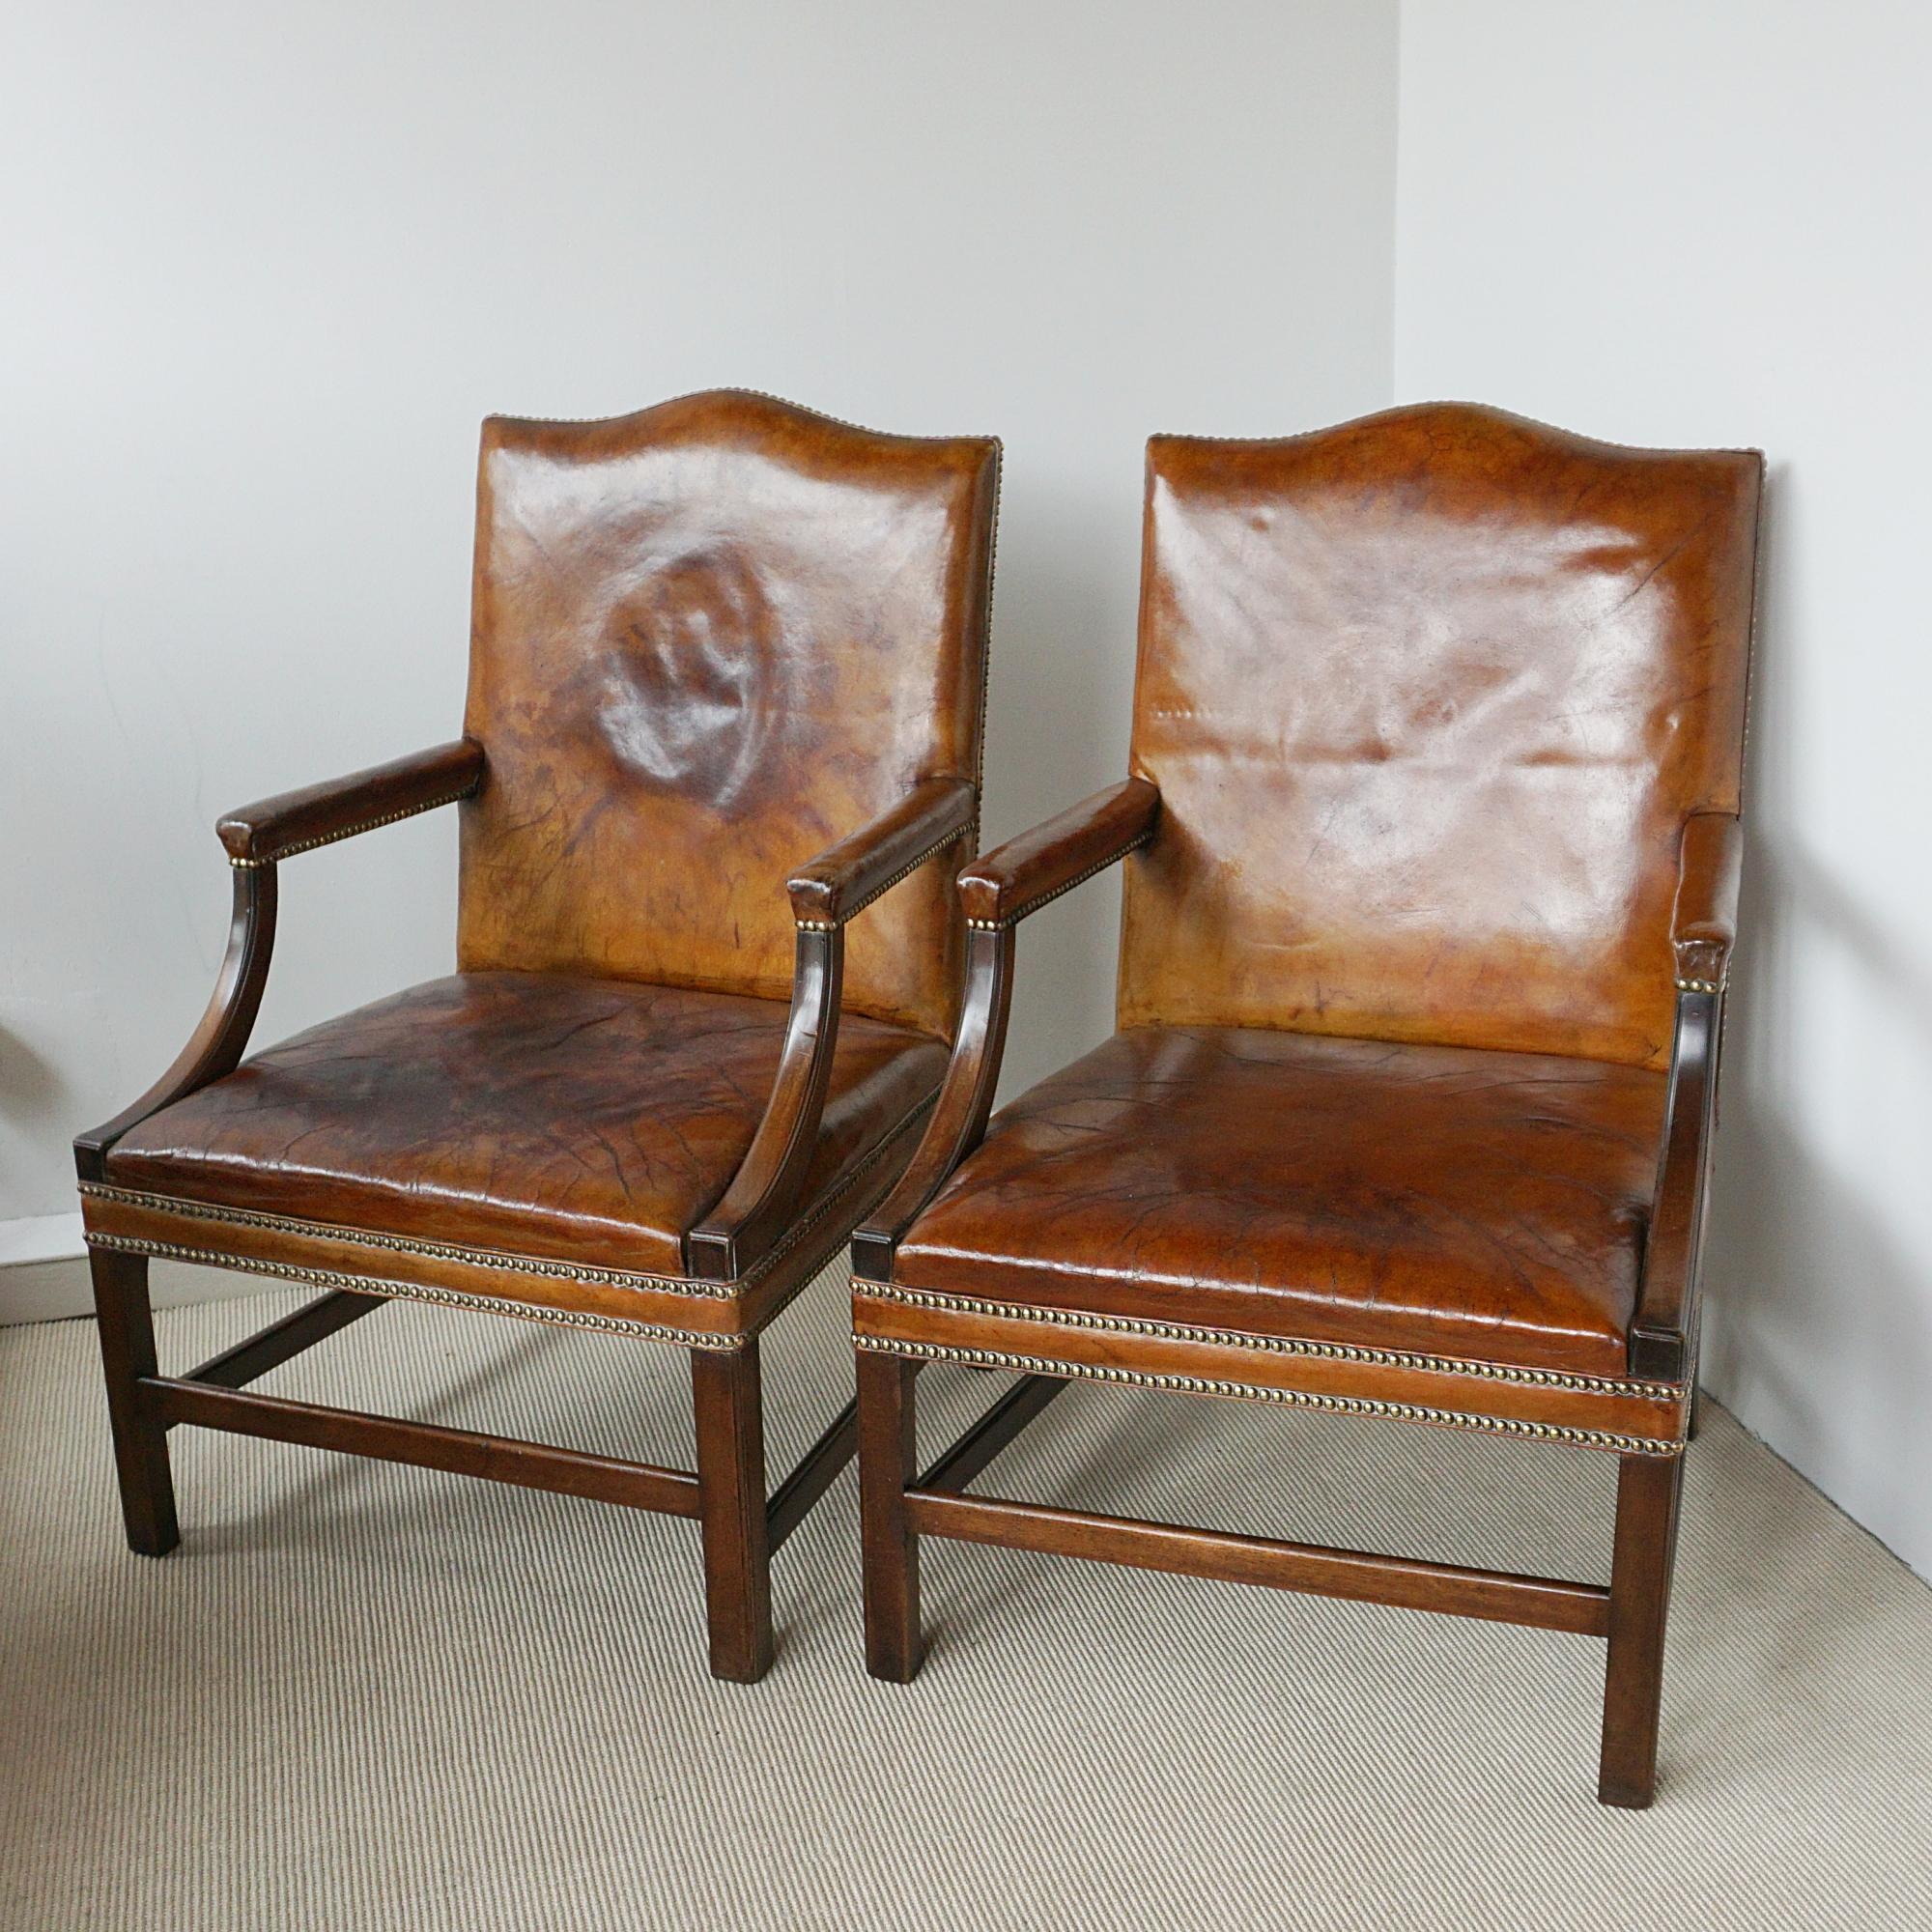 Pair of Gainsborough Library Armchairs English, Circa 1890 In Good Condition For Sale In Forest Row, East Sussex